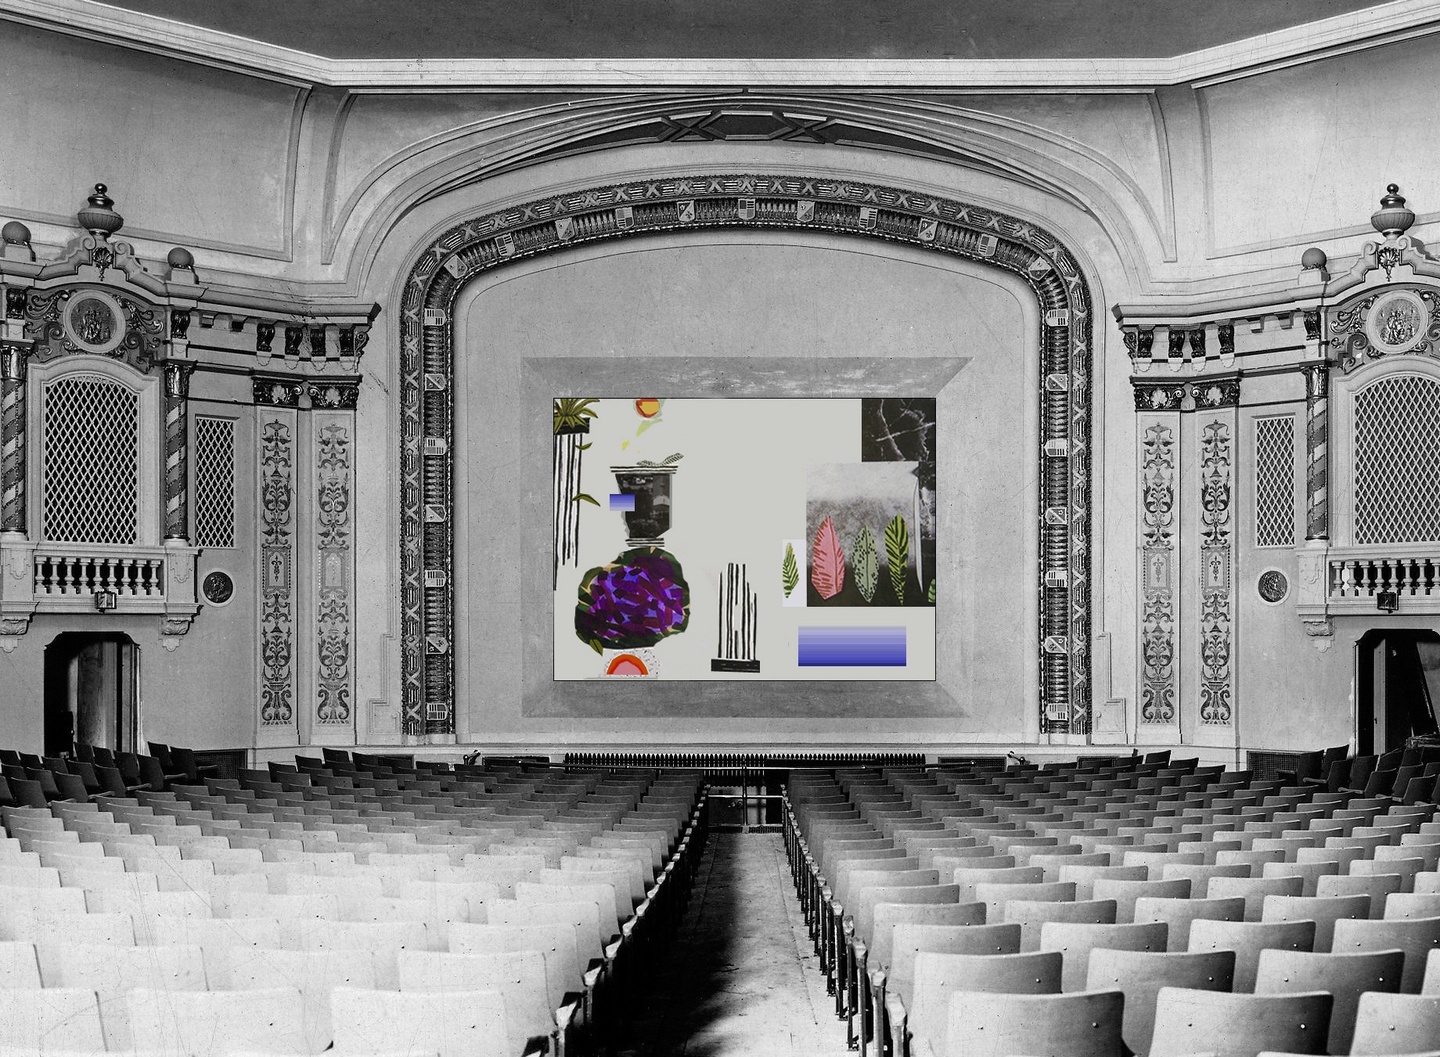 A black and white image of the interior of a theatre; in the center where the stage is, is instead a framed composition of various plants and color gradients (these are in full color) in the center. The light in this image appears somewhere in the back left, illuminating the rows of seats to the left, casting a shadow to the right and to the front. The interior of the space is ornately decorated, the pilasters/columns illustrated with symmetrical floral motifs.